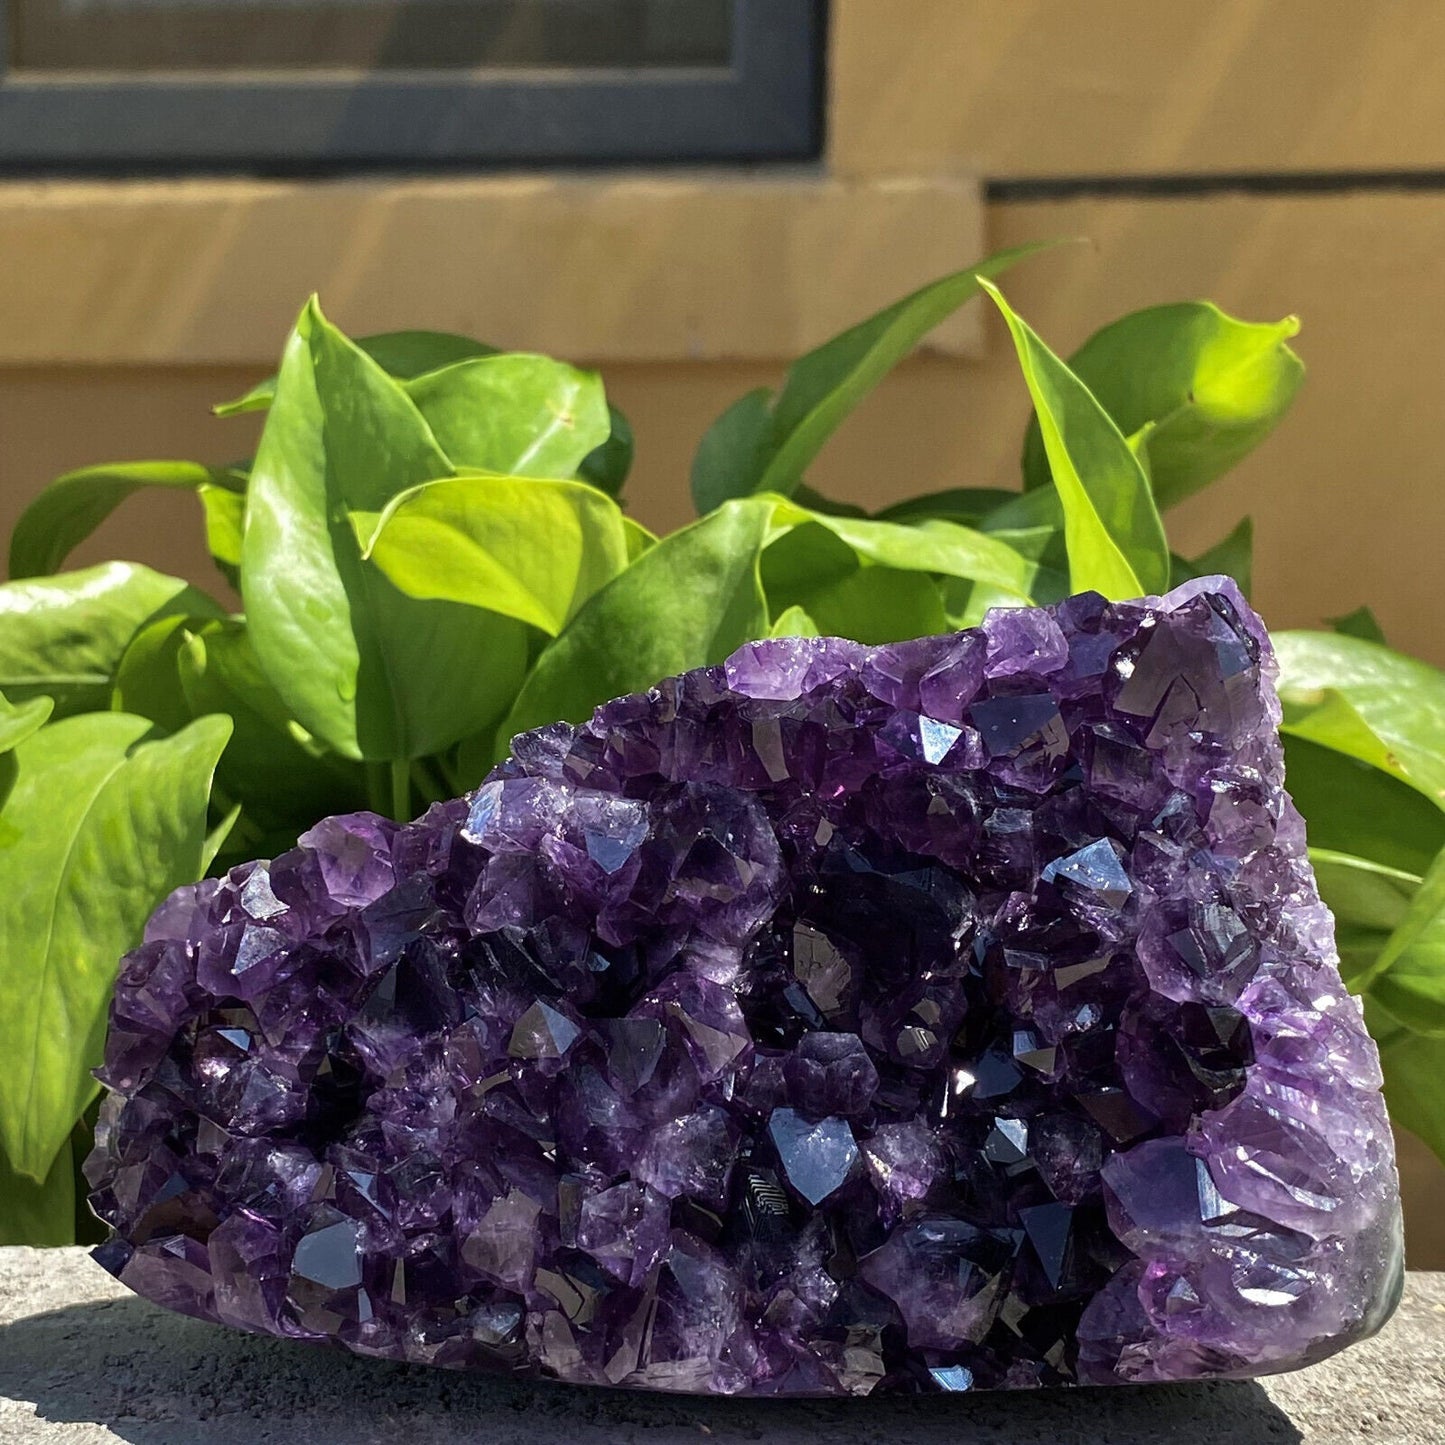 Natural Amethyst Quartz Crystal Cluster - Spirit Energy Therapy Stone for Home Decor and Feng Shui - Beautiful Purple Stone